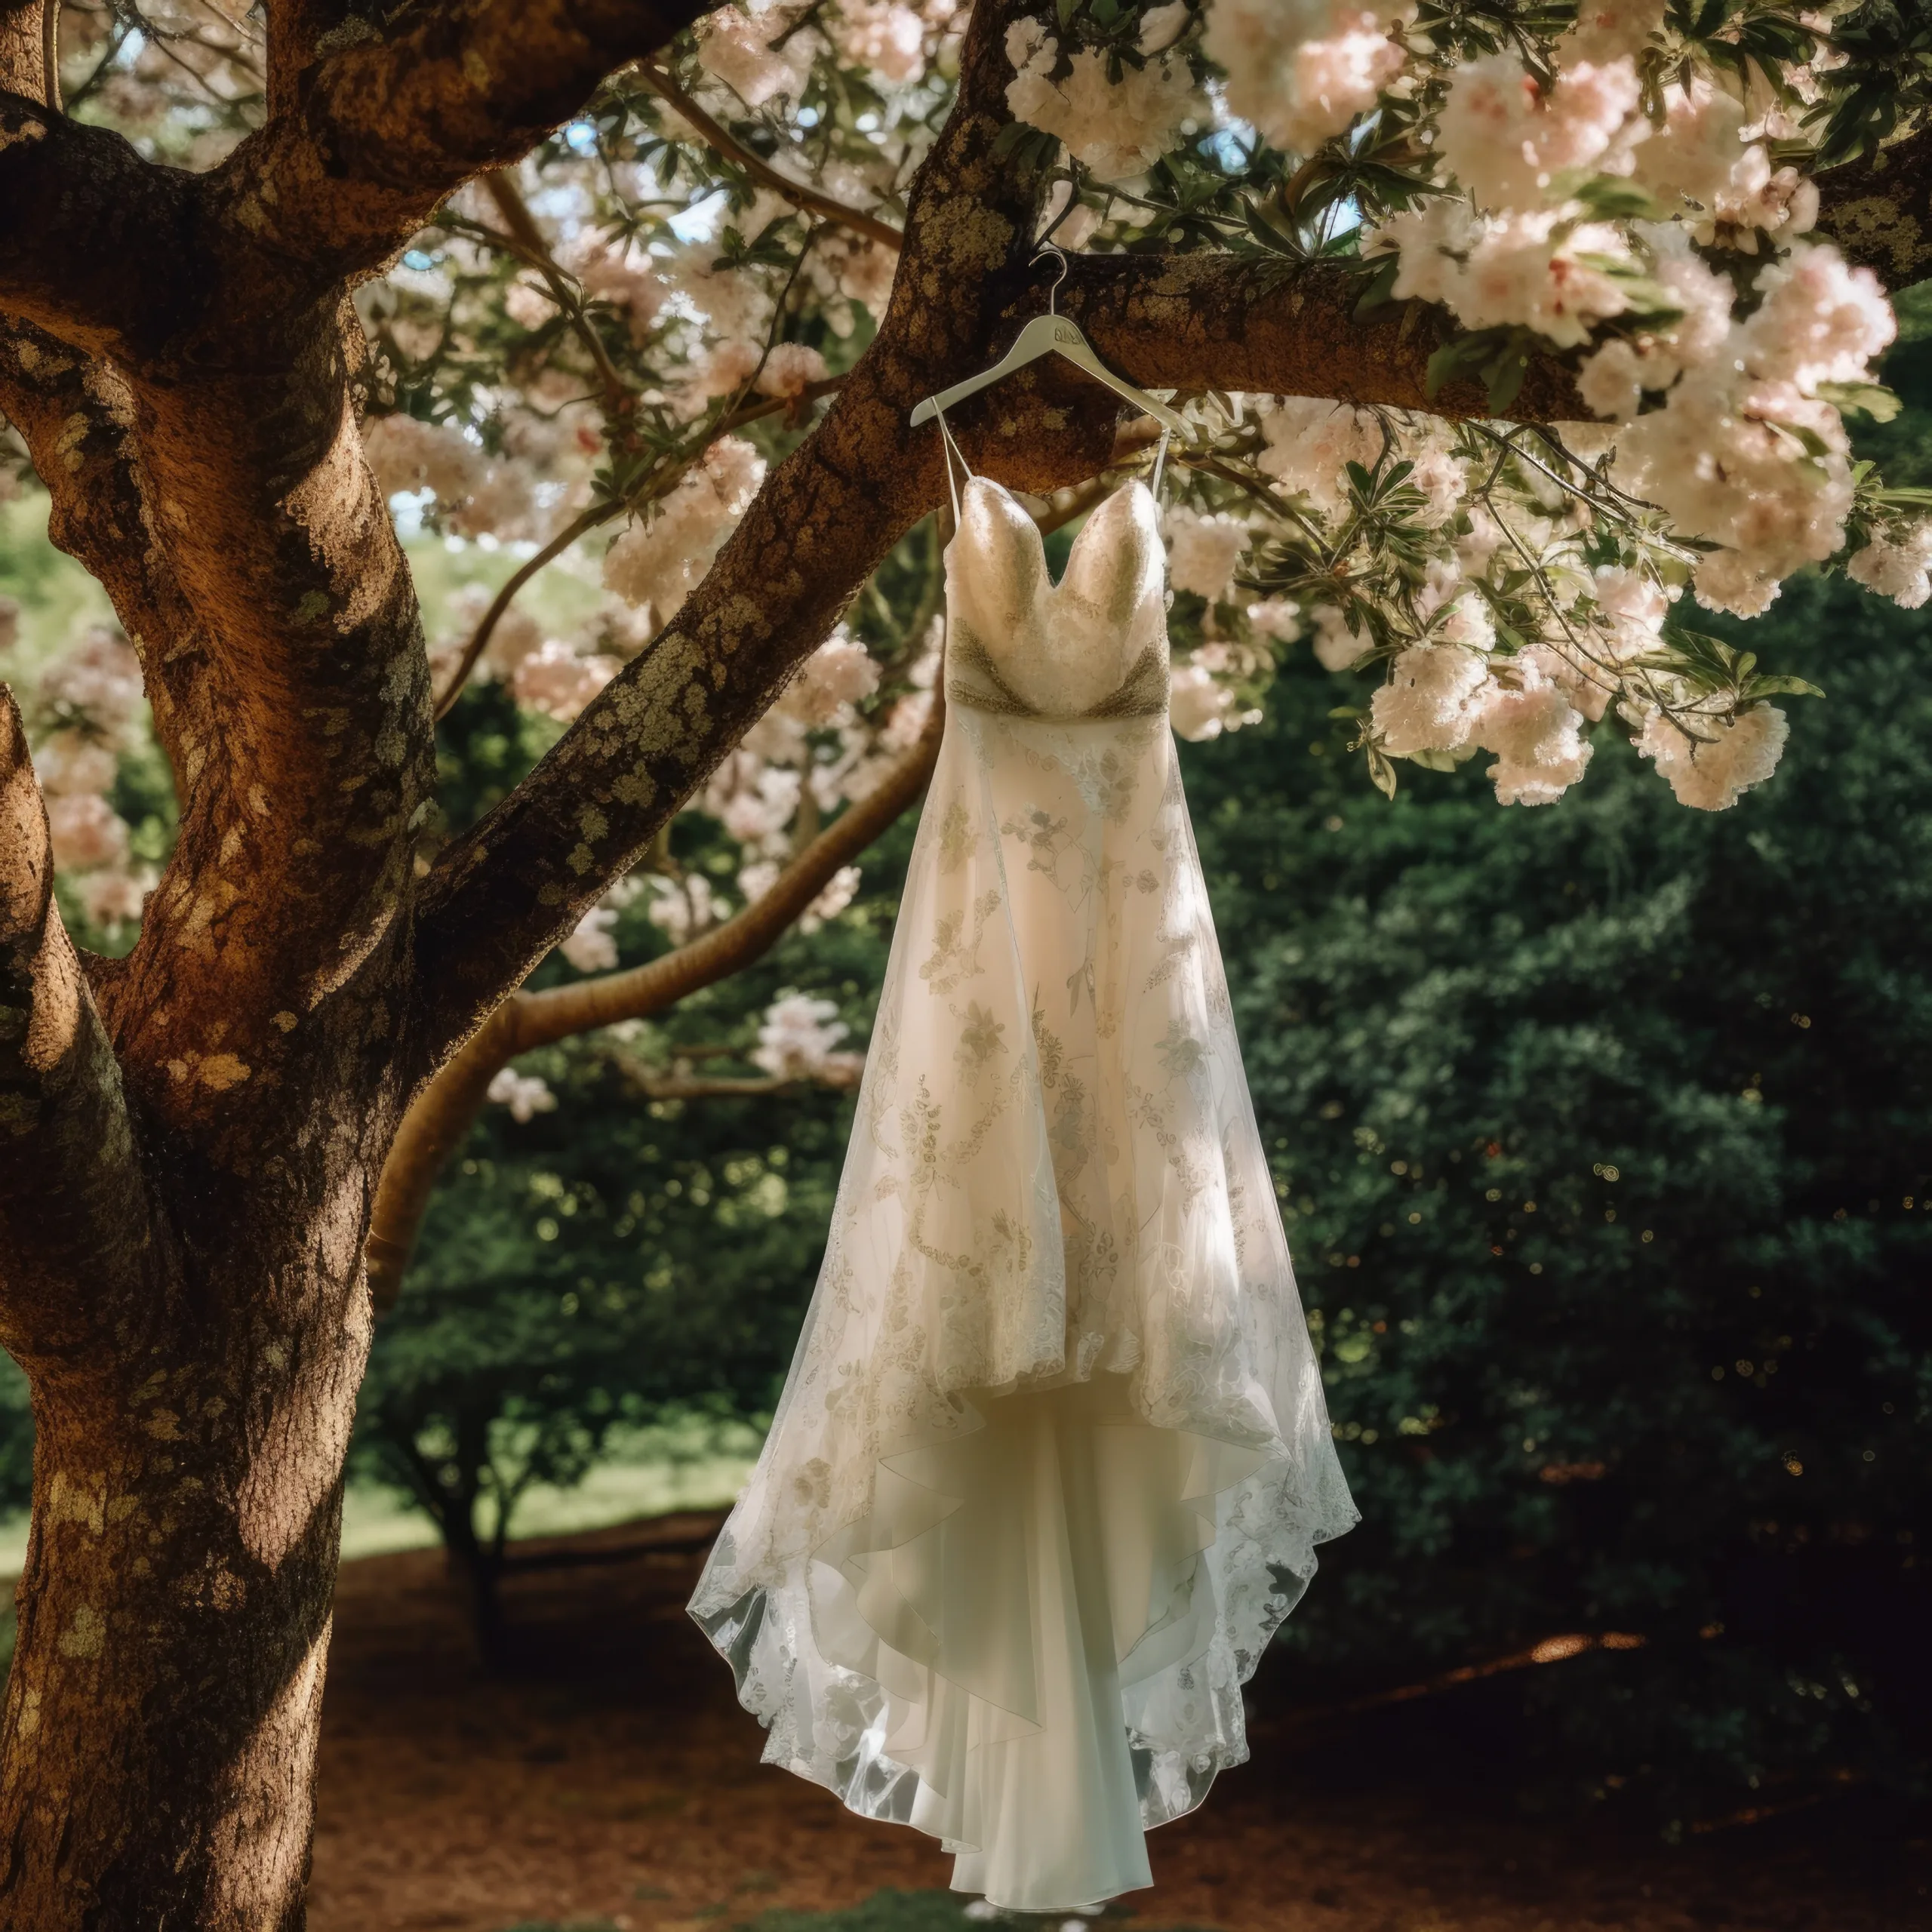 Italian Wedding Photographer: a dress hanging from a tree in a park.